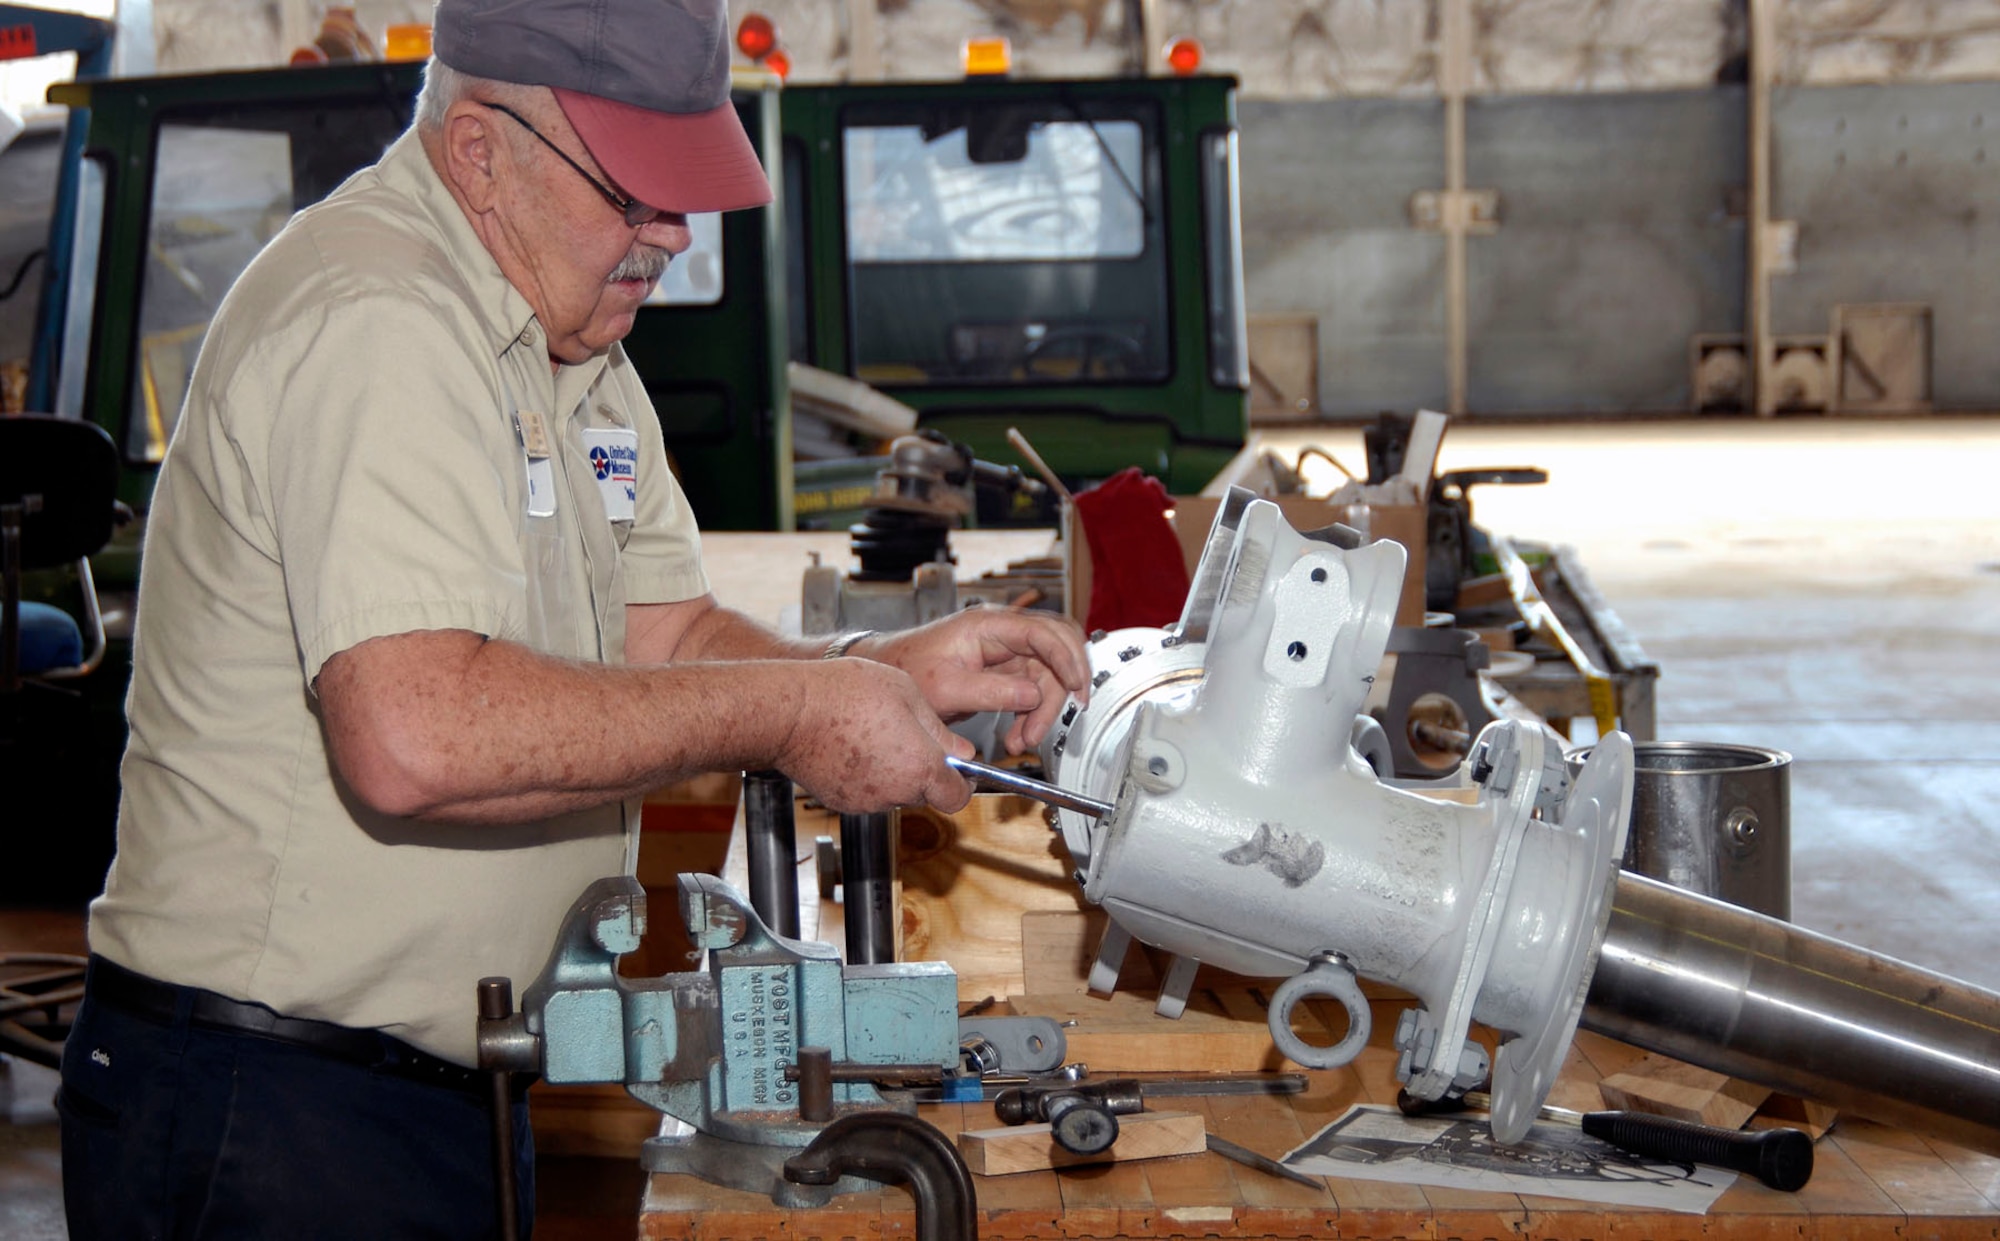 DAYTON, Ohio (02/2007) - Museum volunteer John Vance works on a "Memphis Belle" landing gear strut in the restoration area of the National Museum of the U.S. Air Force. (U.S. Air Force photo)